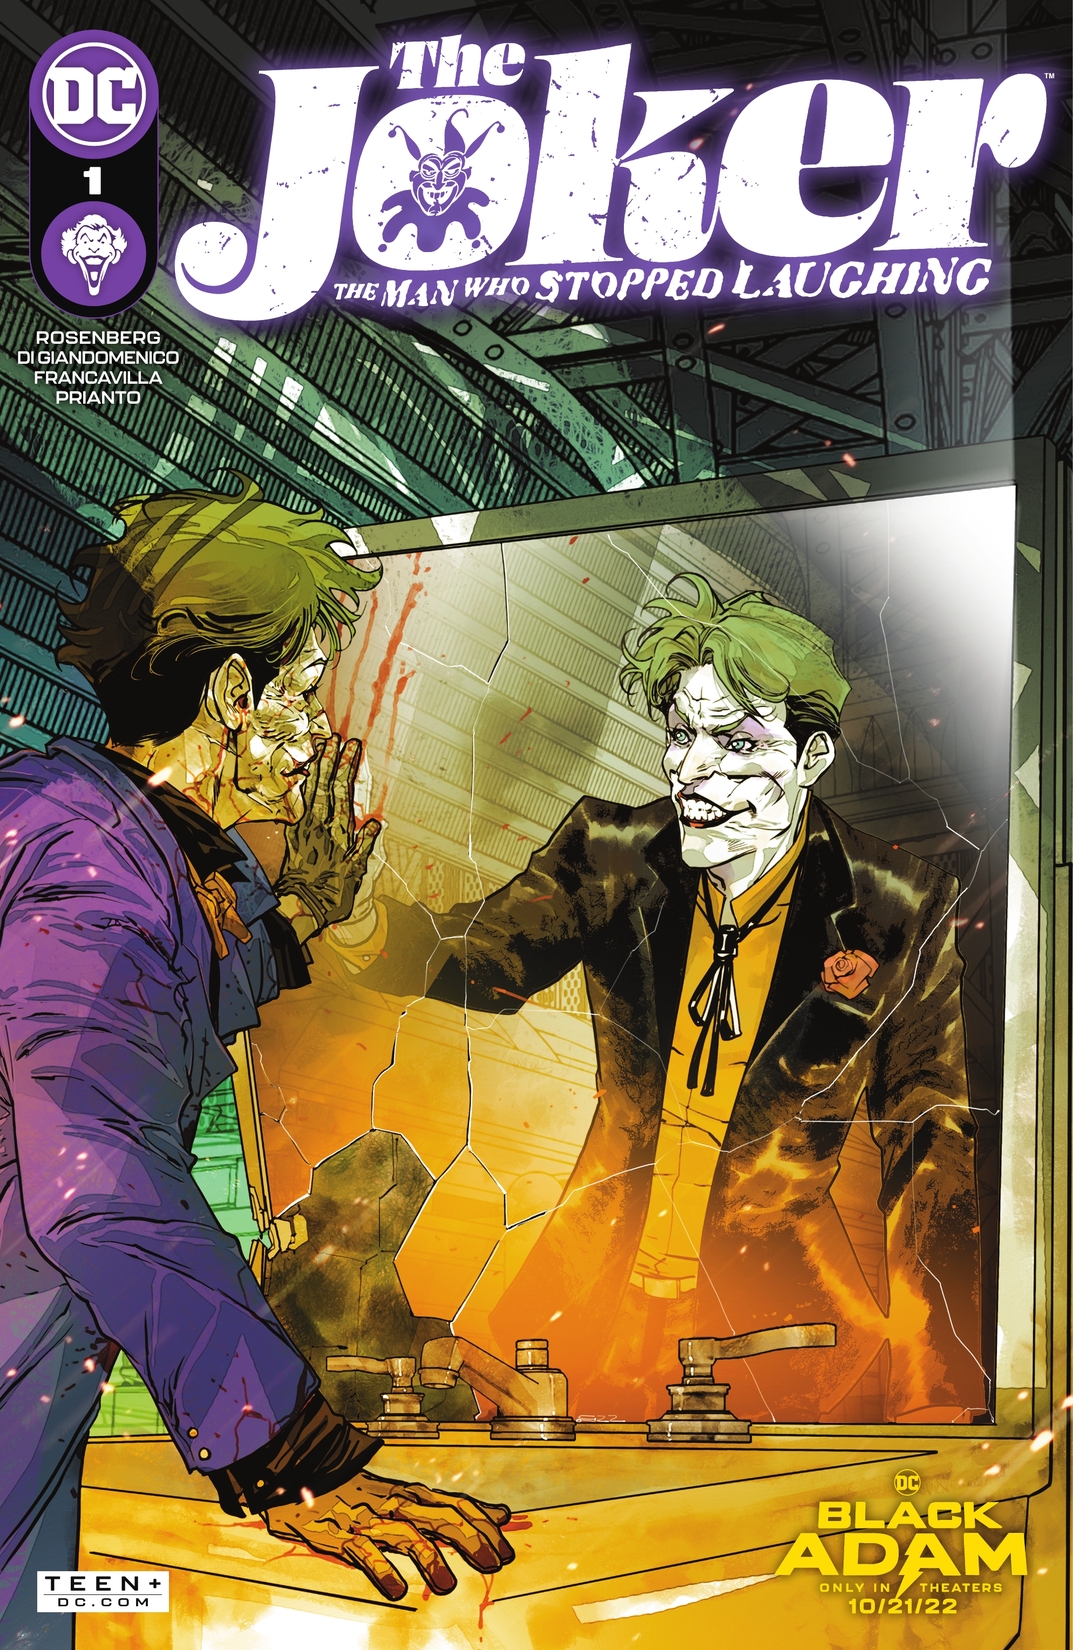 The Joker: The Man Who Stopped Laughing #1 preview images